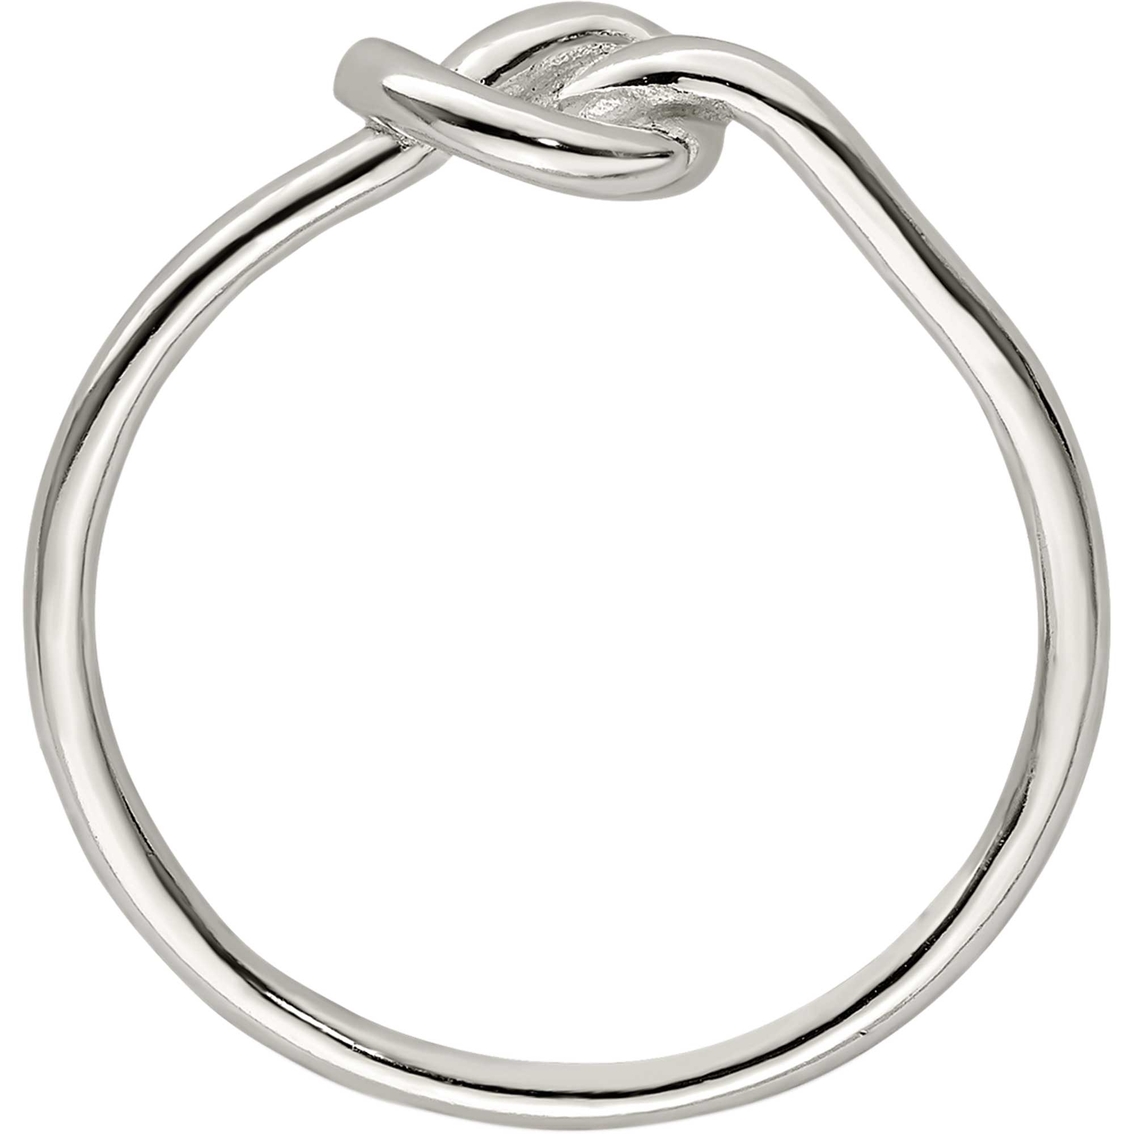 Sterling Silver Polished Knot Ring - Image 2 of 3